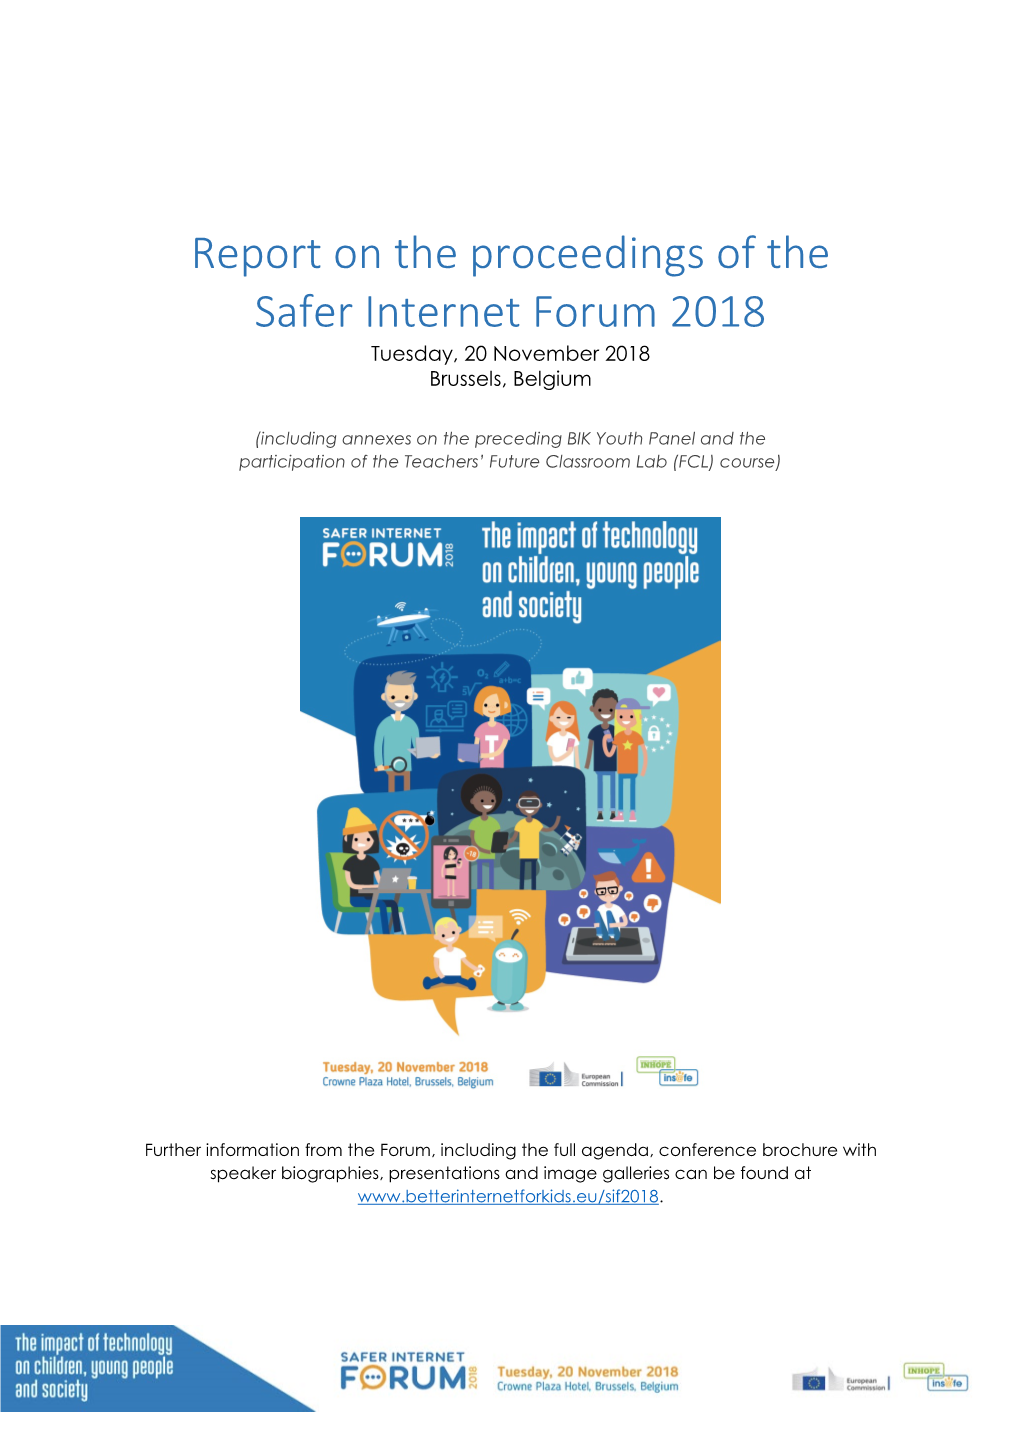 Report on the Proceedings of the Safer Internet Forum 2018 Tuesday, 20 November 2018 Brussels, Belgium